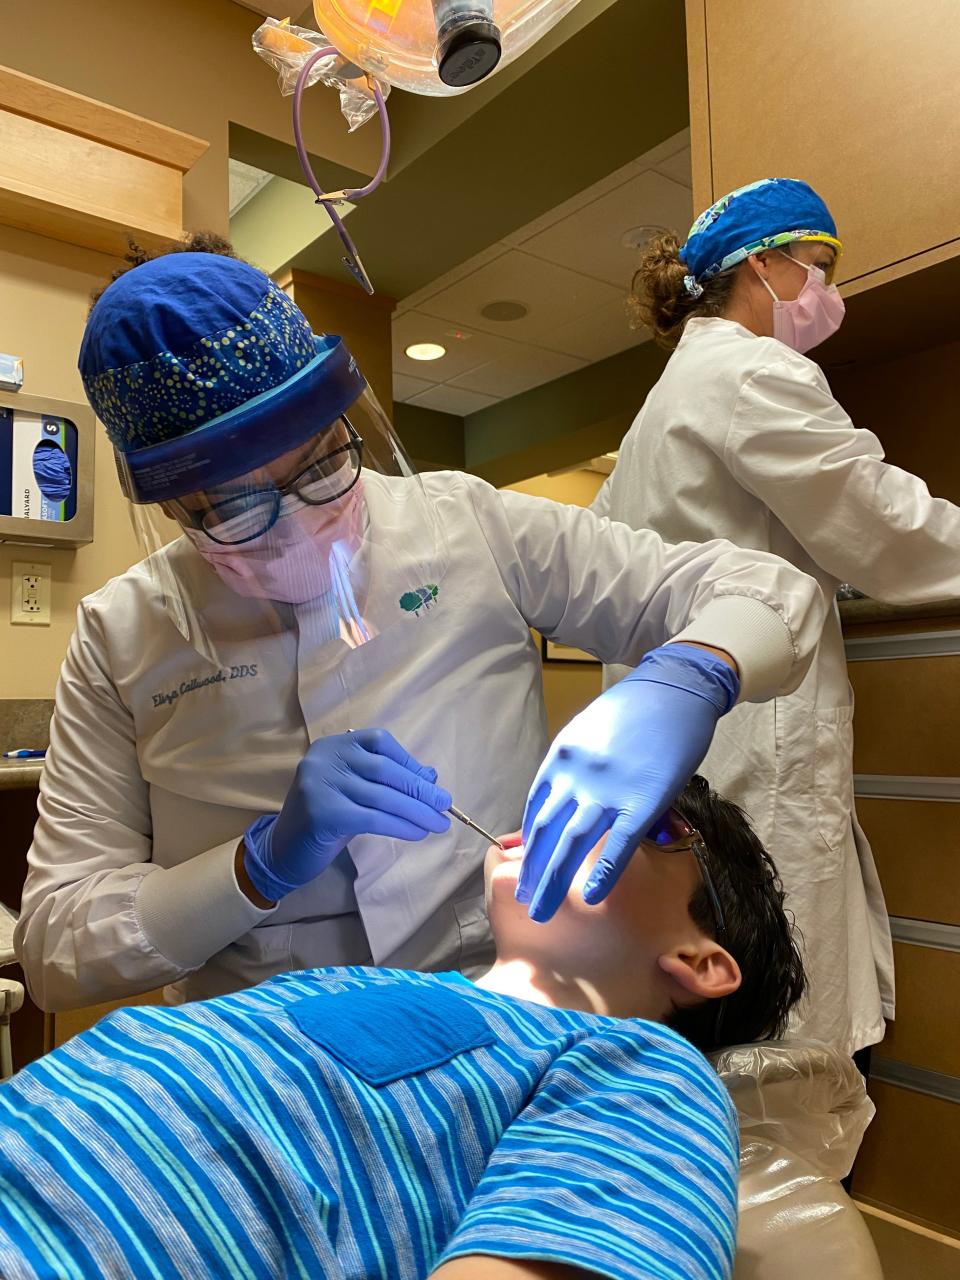 Dentist Eliza Callwood checks 10-year-old Xander Barton's teeth during a routine cleaning at Timberlane Dental in South Burlington on June 23, 2020.